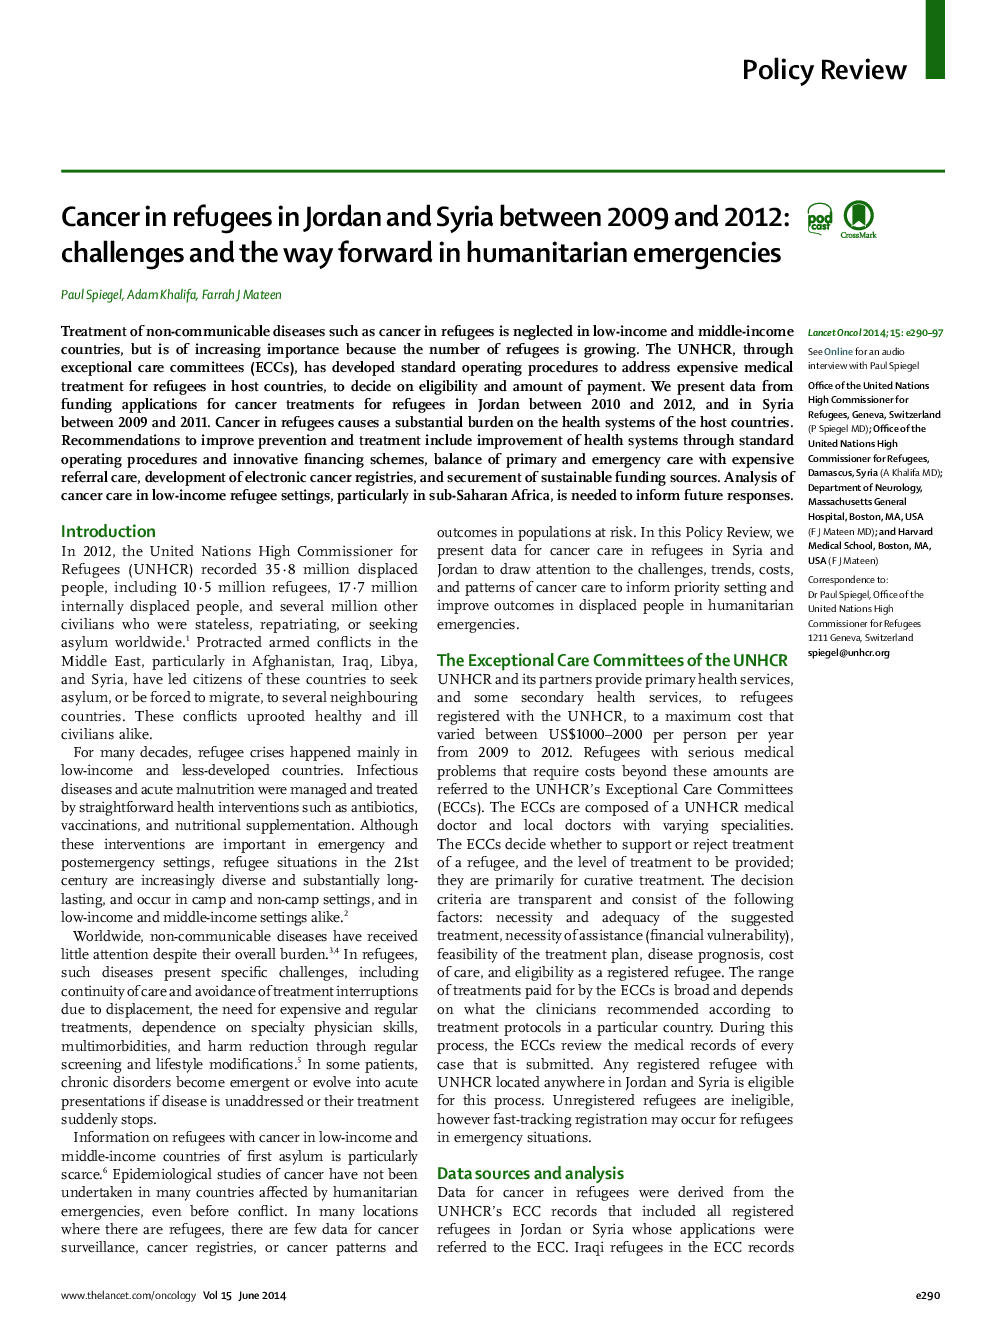 Cancer in refugees in Jordan and Syria between 2009 and 2012: challenges and the way forward in humanitarian emergencies